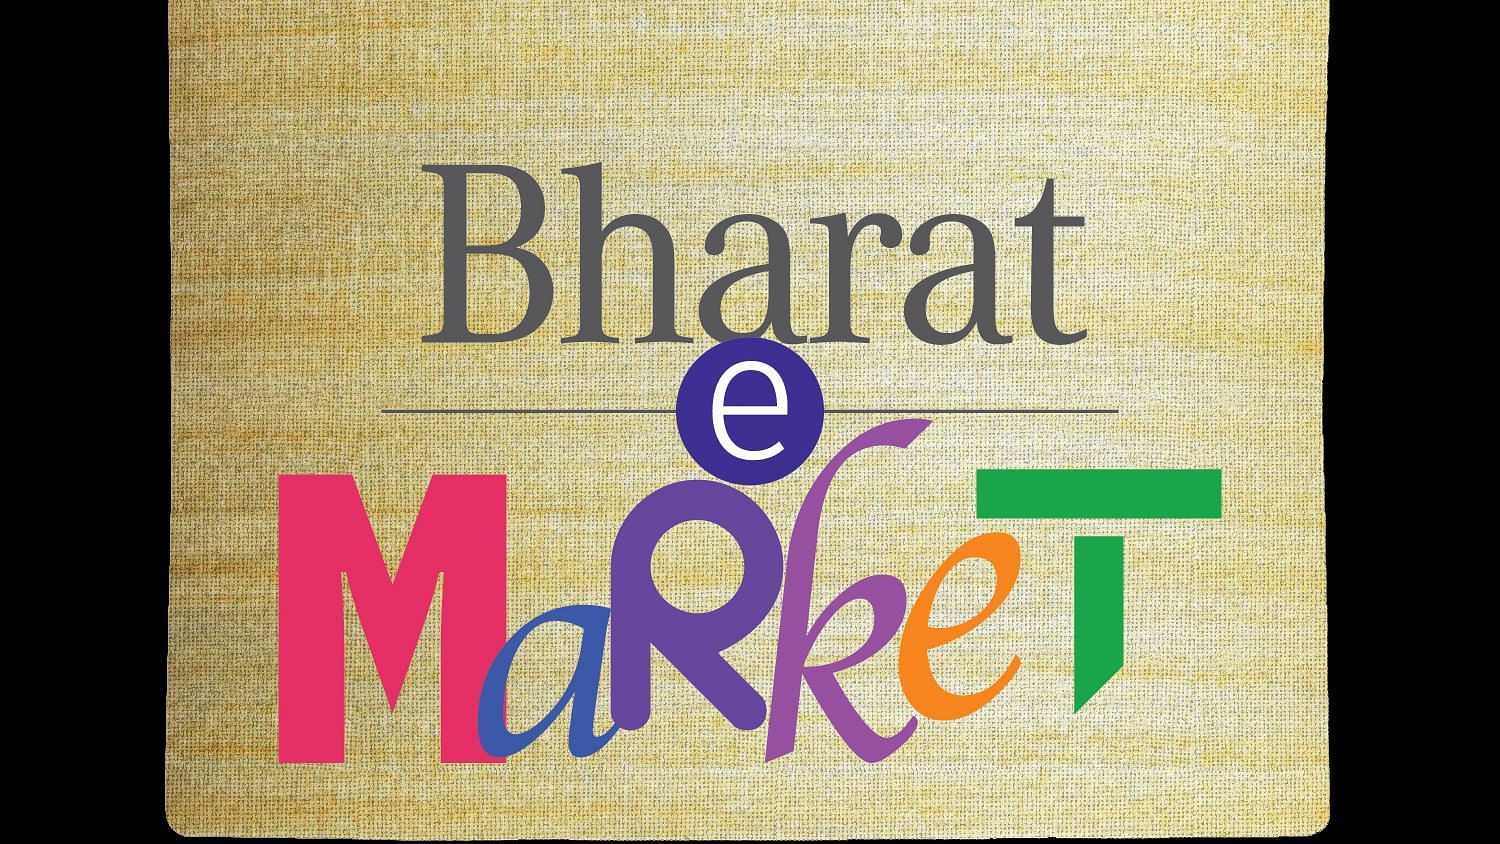 CAIT said that its Bharat e Market portal is ‘purely Indian’ which will comply with all the rules and regulations of the country.